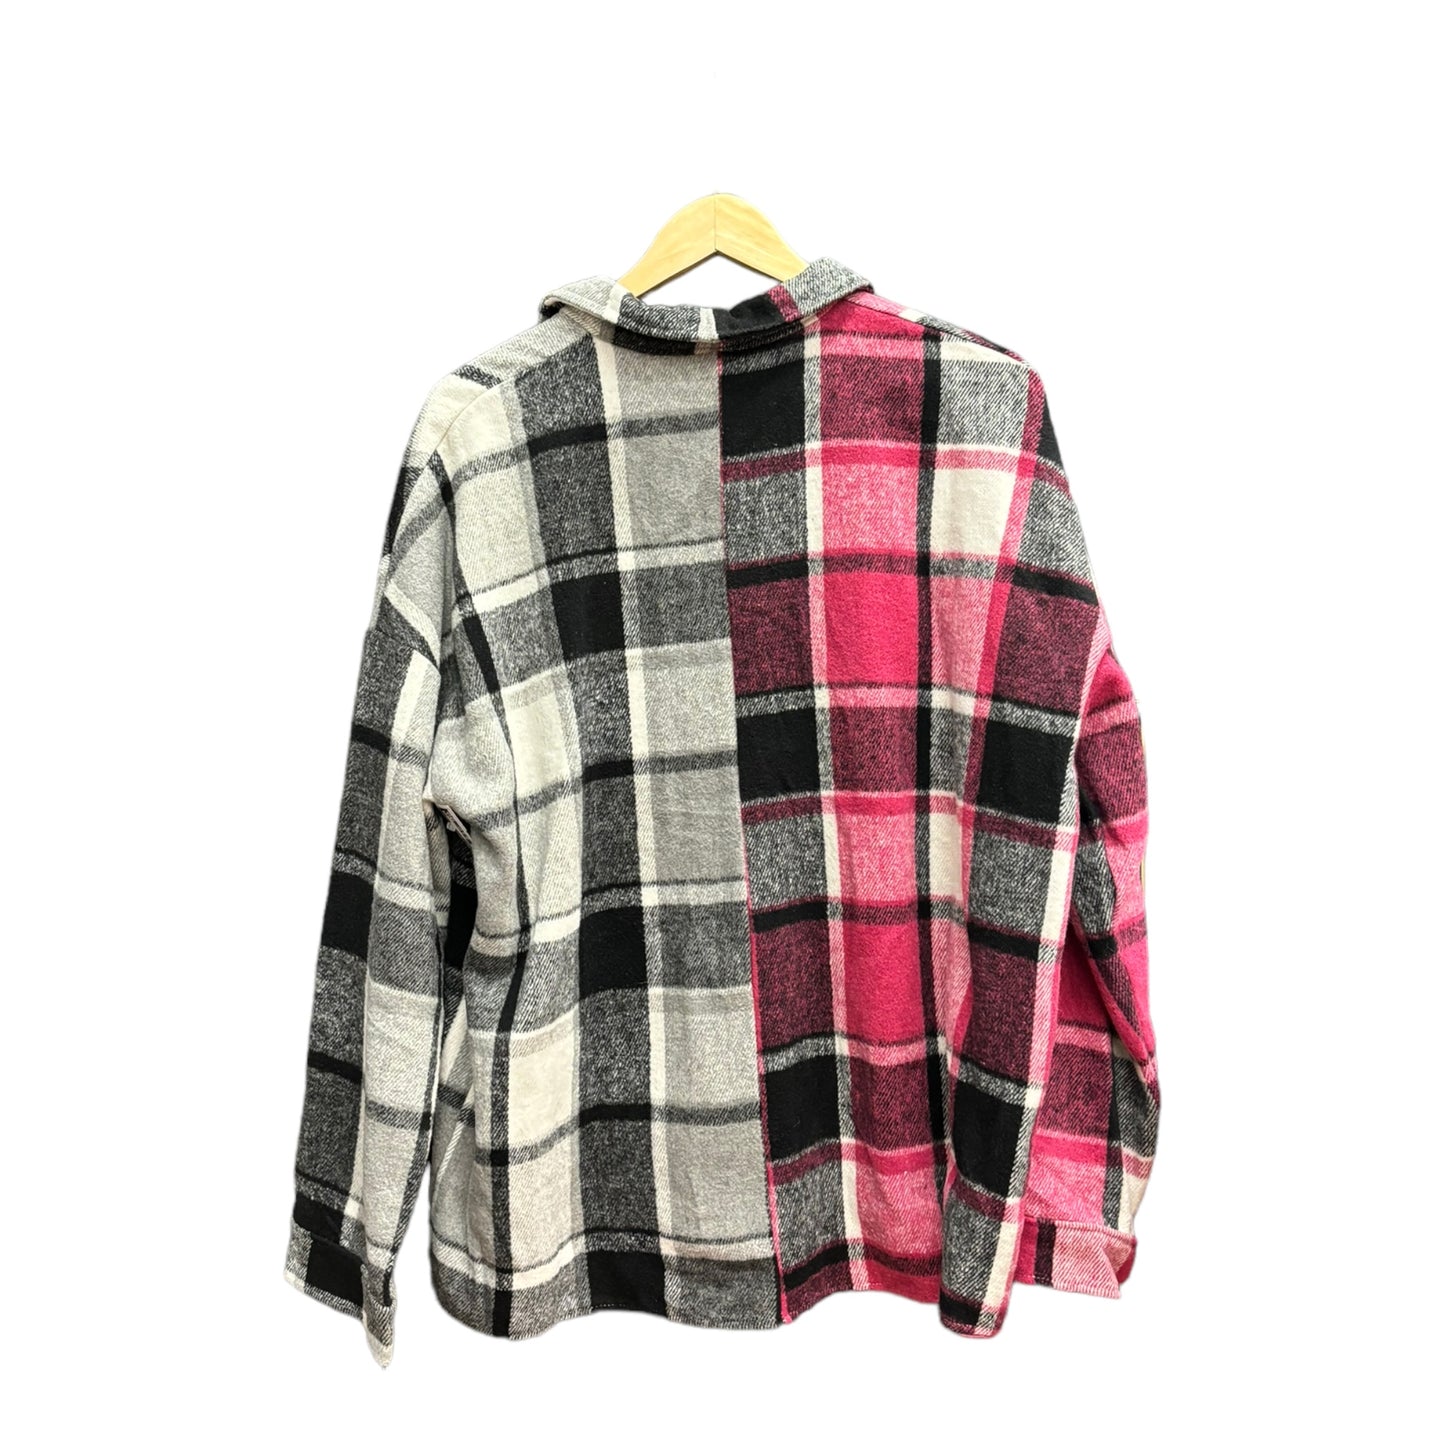 Jacket Shirt By Clothes Mentor  Size: 2x